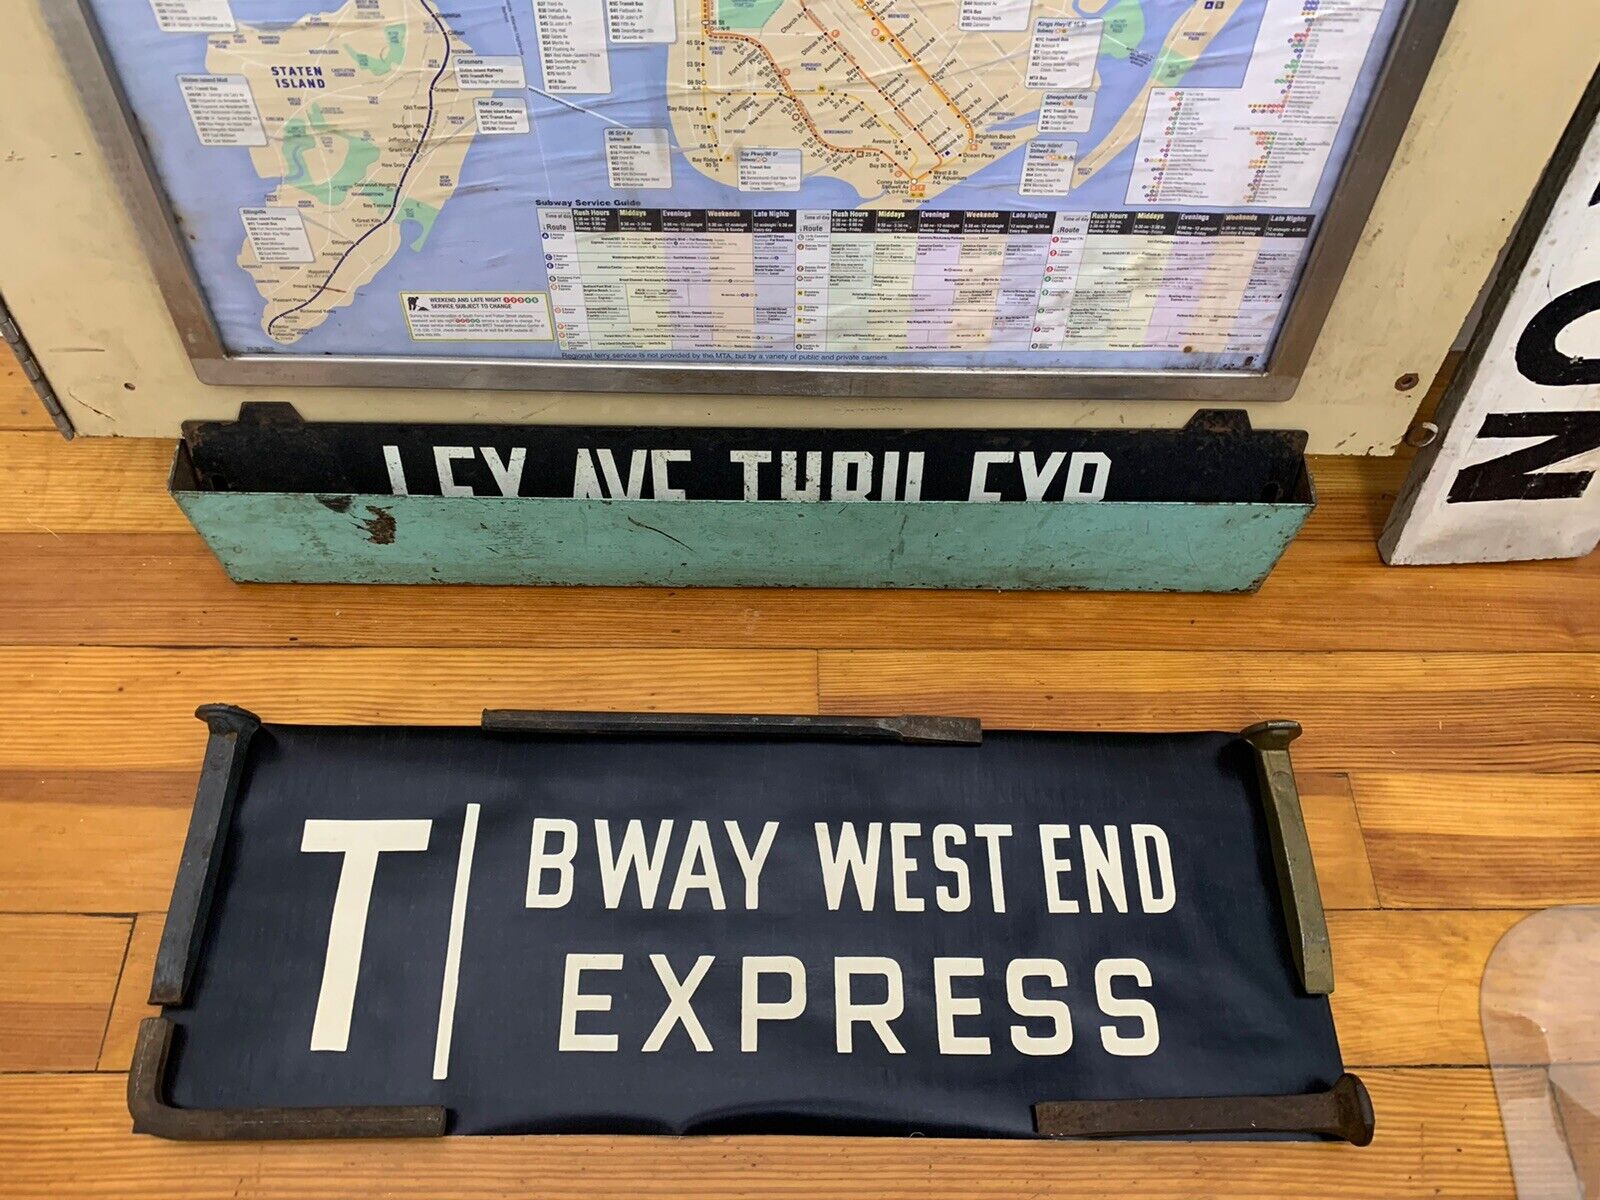 ORIGINAL 1961 NY NYC SUBWAY ROLL SIGN T BROADWAY THEATER PLAYS WEST END EXPRESS